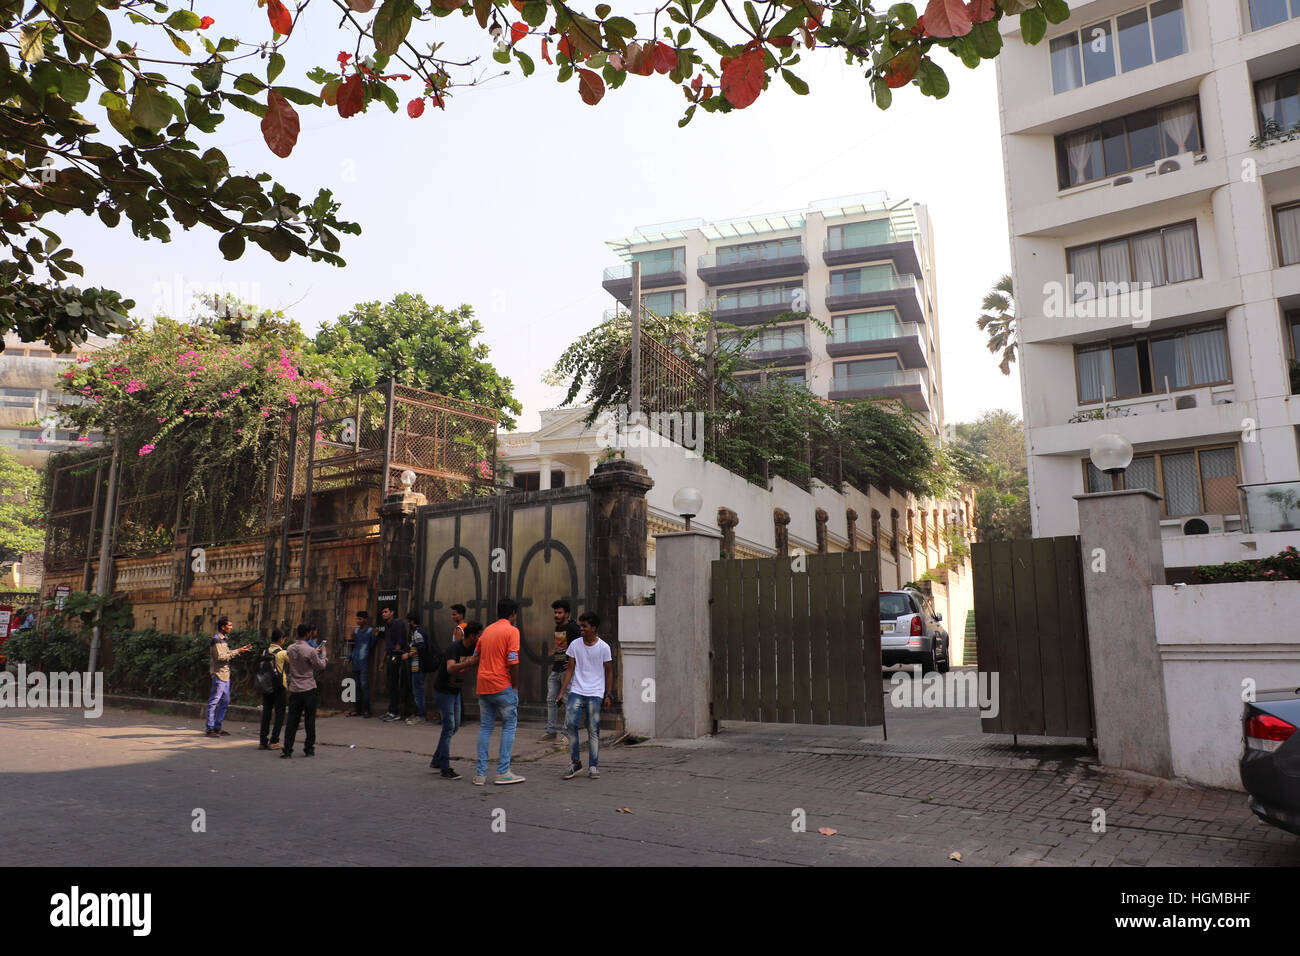 Bollywood super star Shahrukh Khan’s house Mannat situated in Bandra, Mumbai, looks very Victorian and is filled with exquisite furnishings. Stock Photo